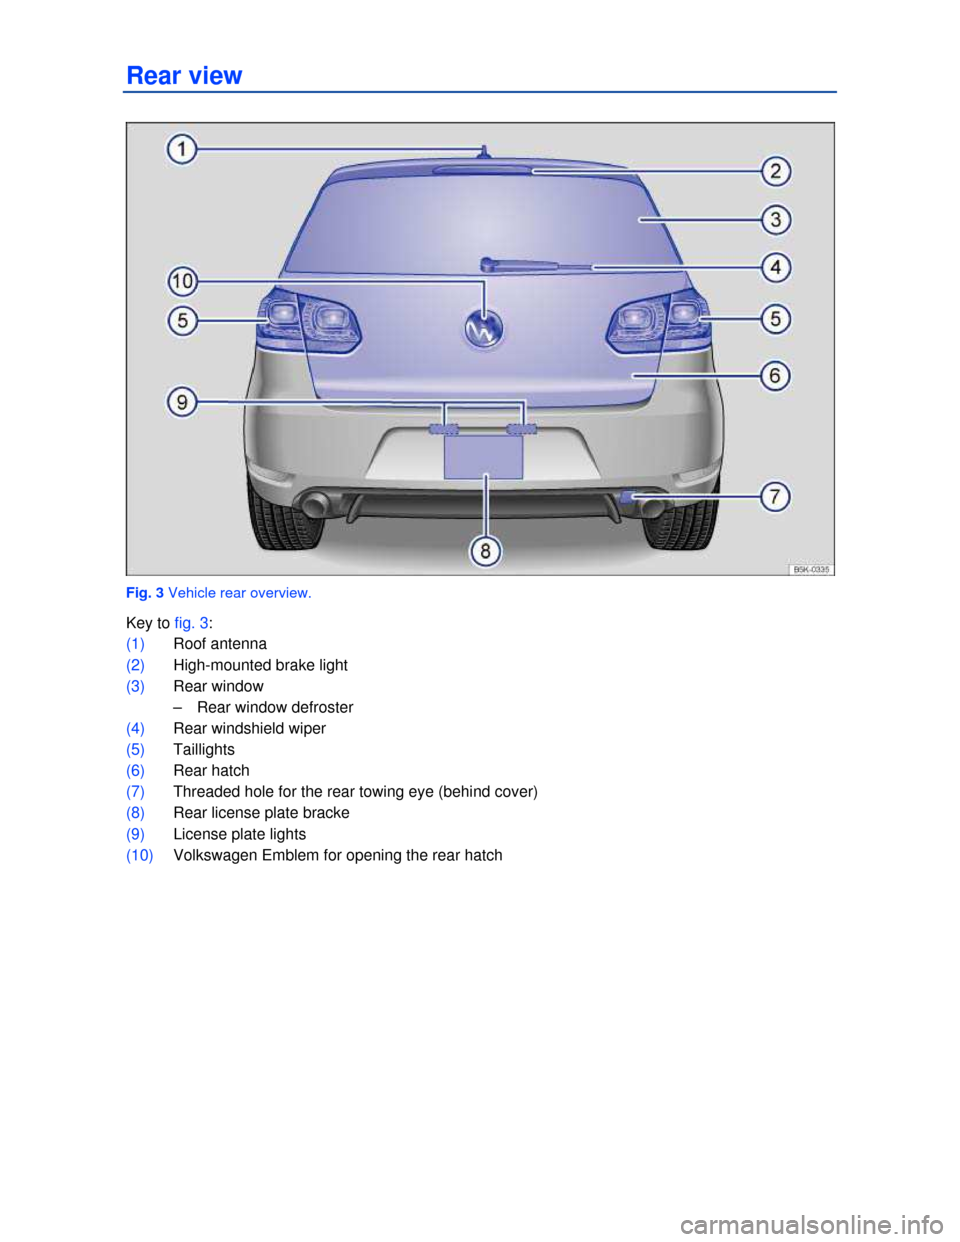 VOLKSWAGEN GOLF GTI 2013 5G / 7.G Owners Manual Rear view 
 
Fig. 3 Vehicle rear overview. 
Key to fig. 3: 
(1) Roof antenna  
(2) High-mounted brake light  
(3) Rear window 
–  Rear window defroster  
(4) Rear windshield wiper  
(5) Taillights  